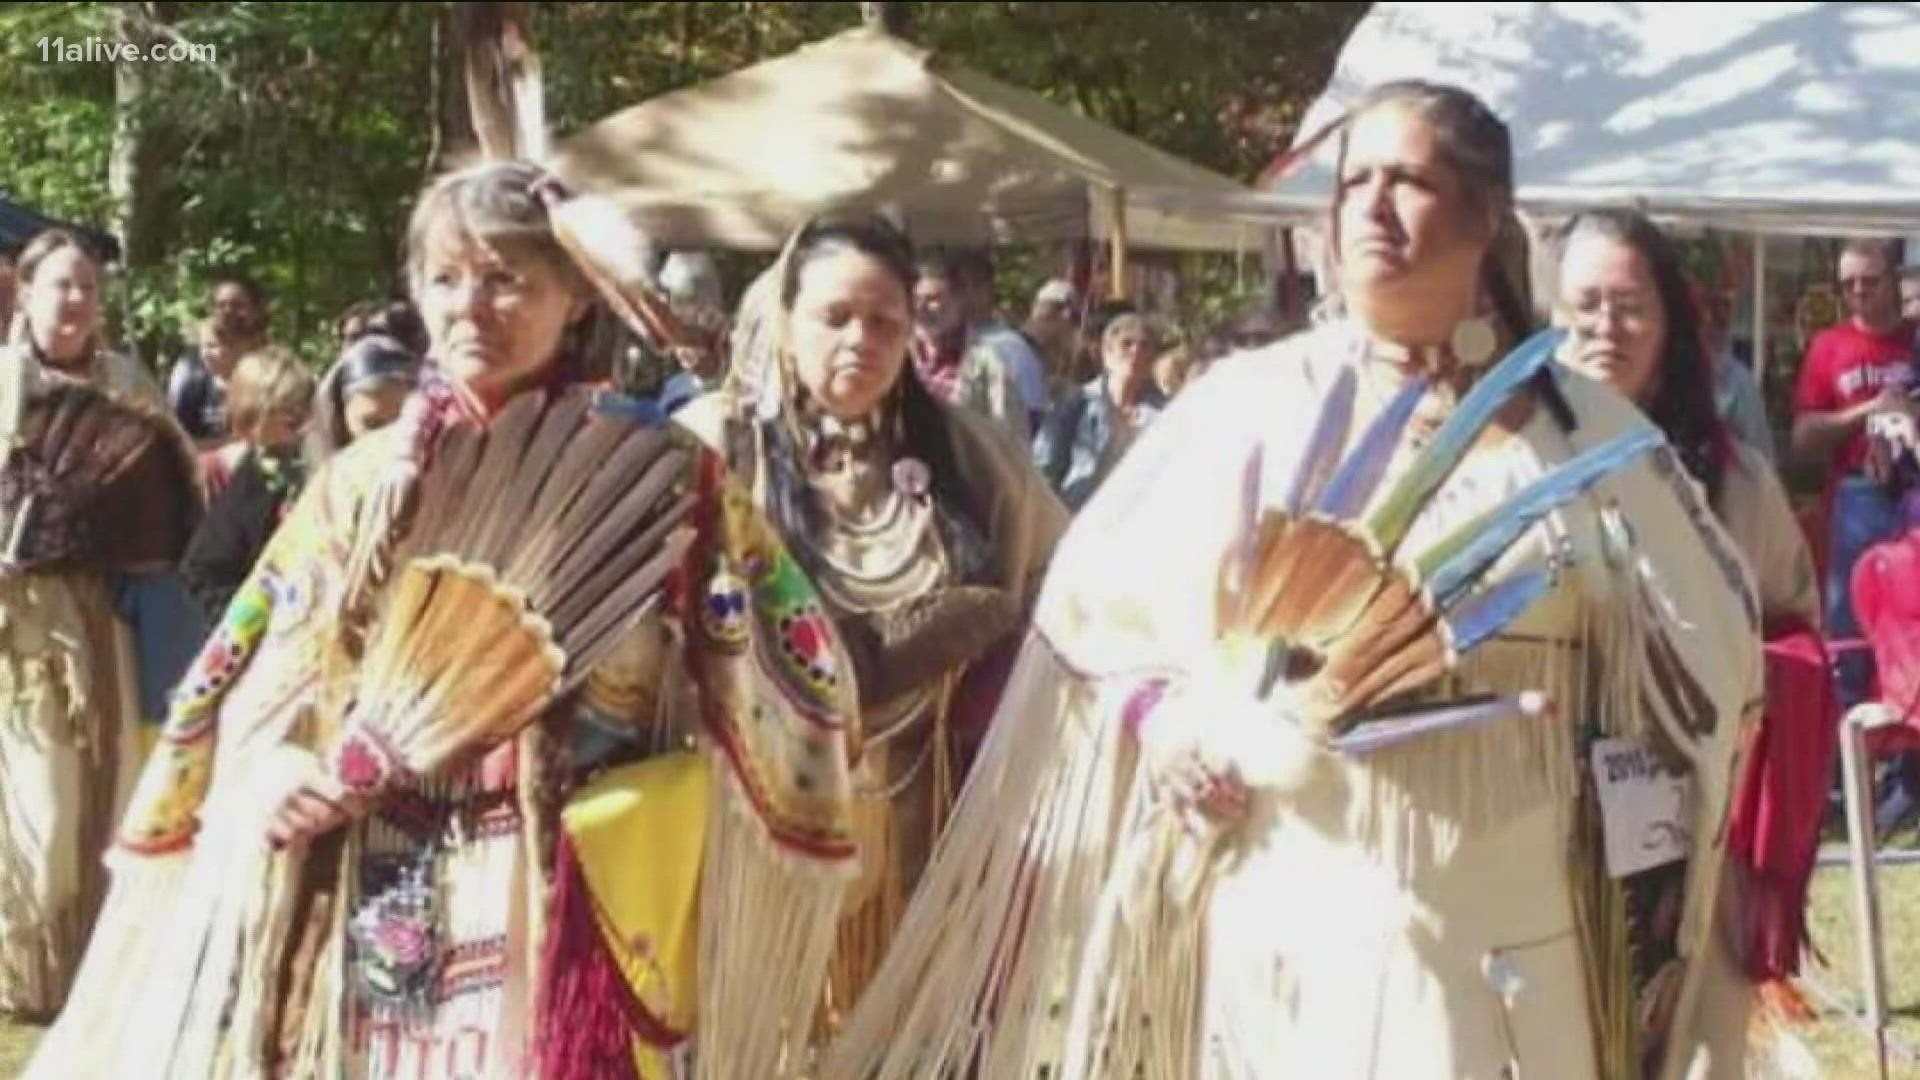 While groups acknowledge recognizing Indigenous Peoples' Day is a step forward, they say there is still a long way to go.